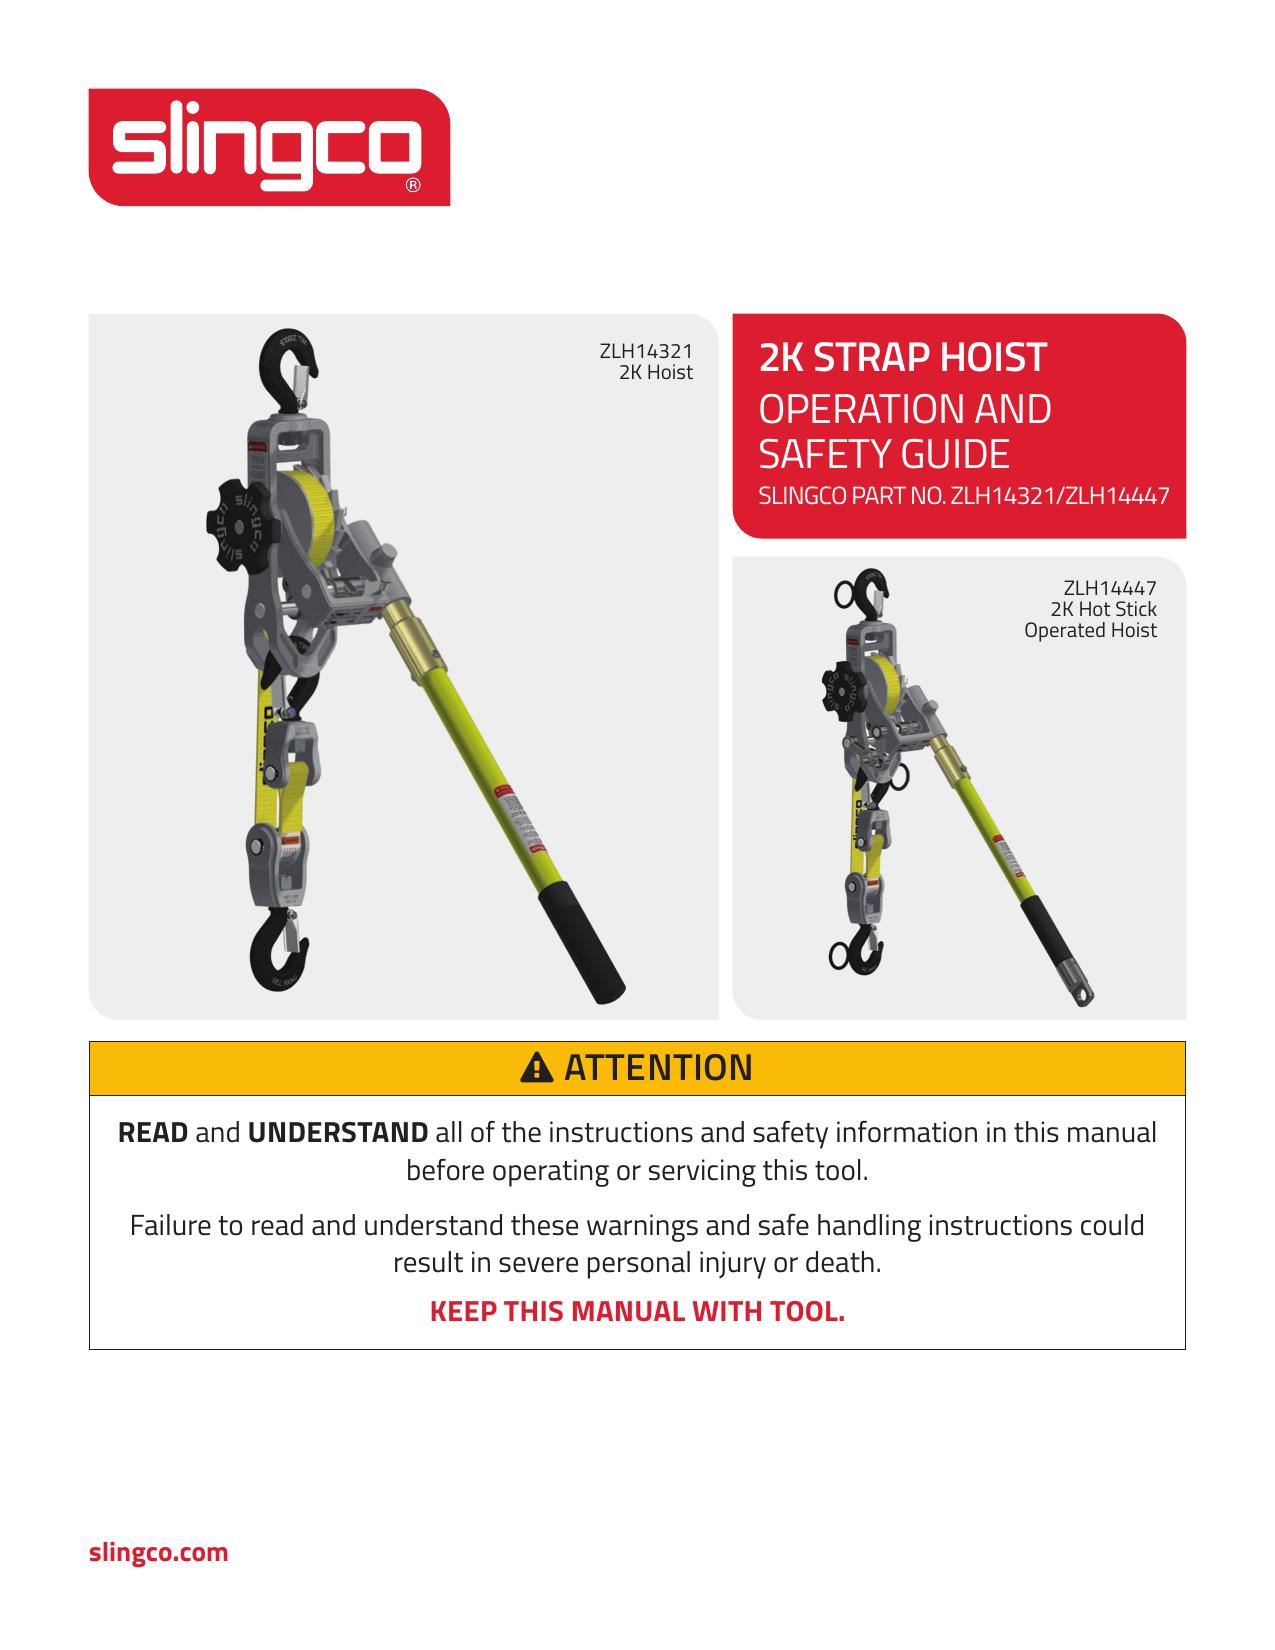 2K Strap Hoist Operation And Safety Guide